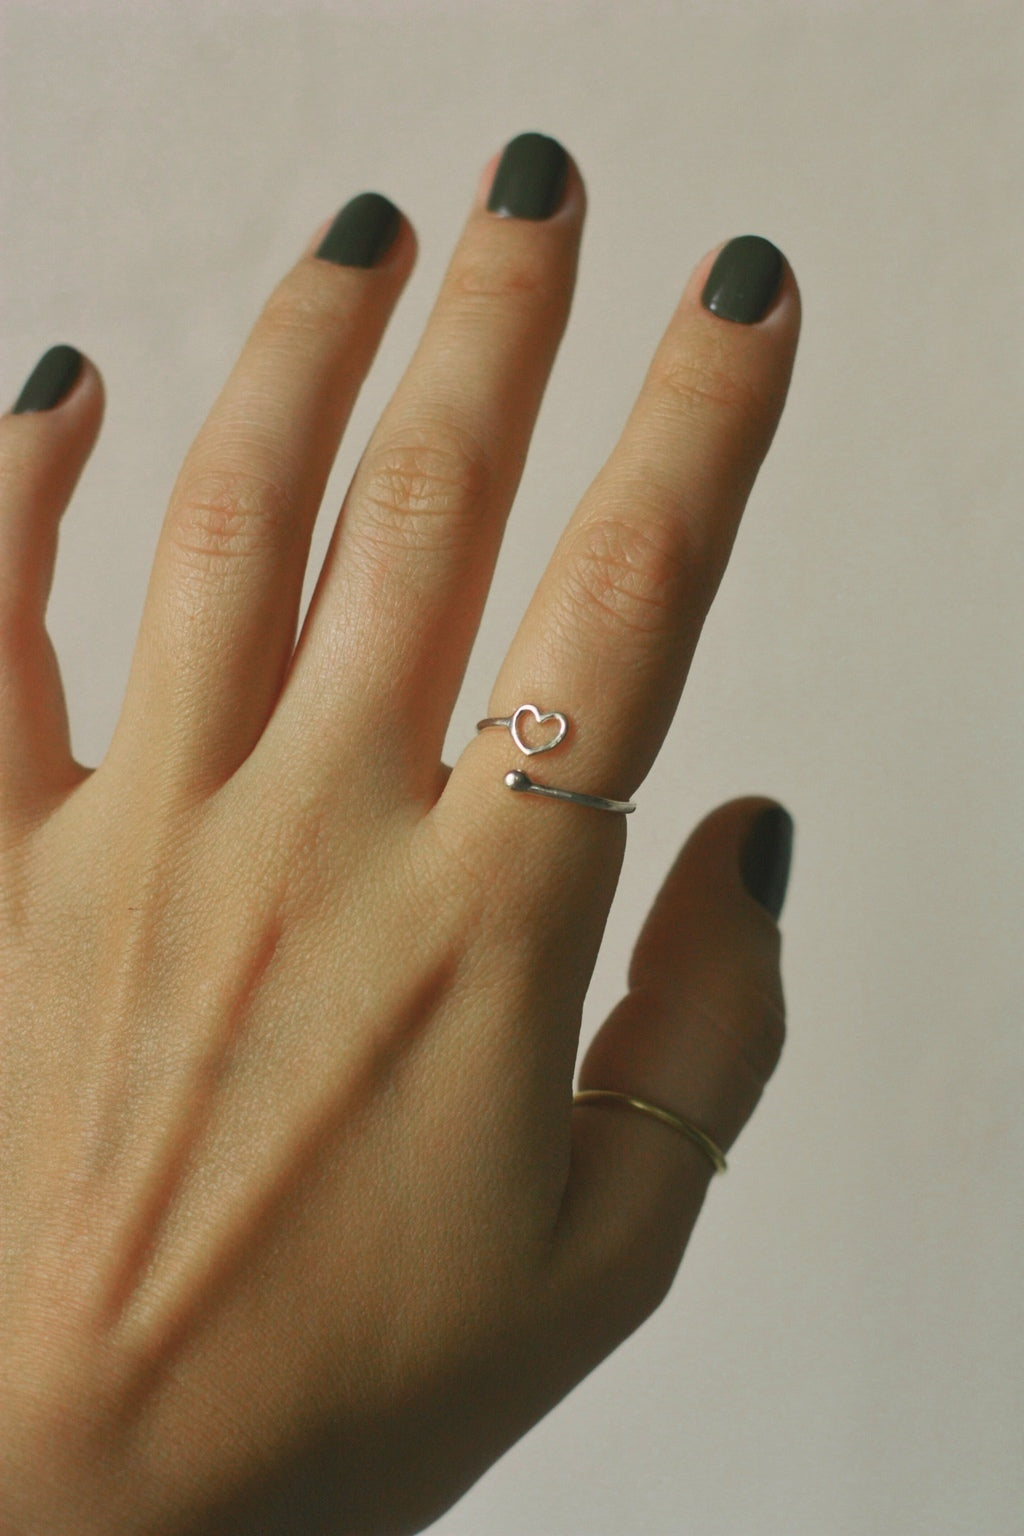 Ring "Little heart" one size